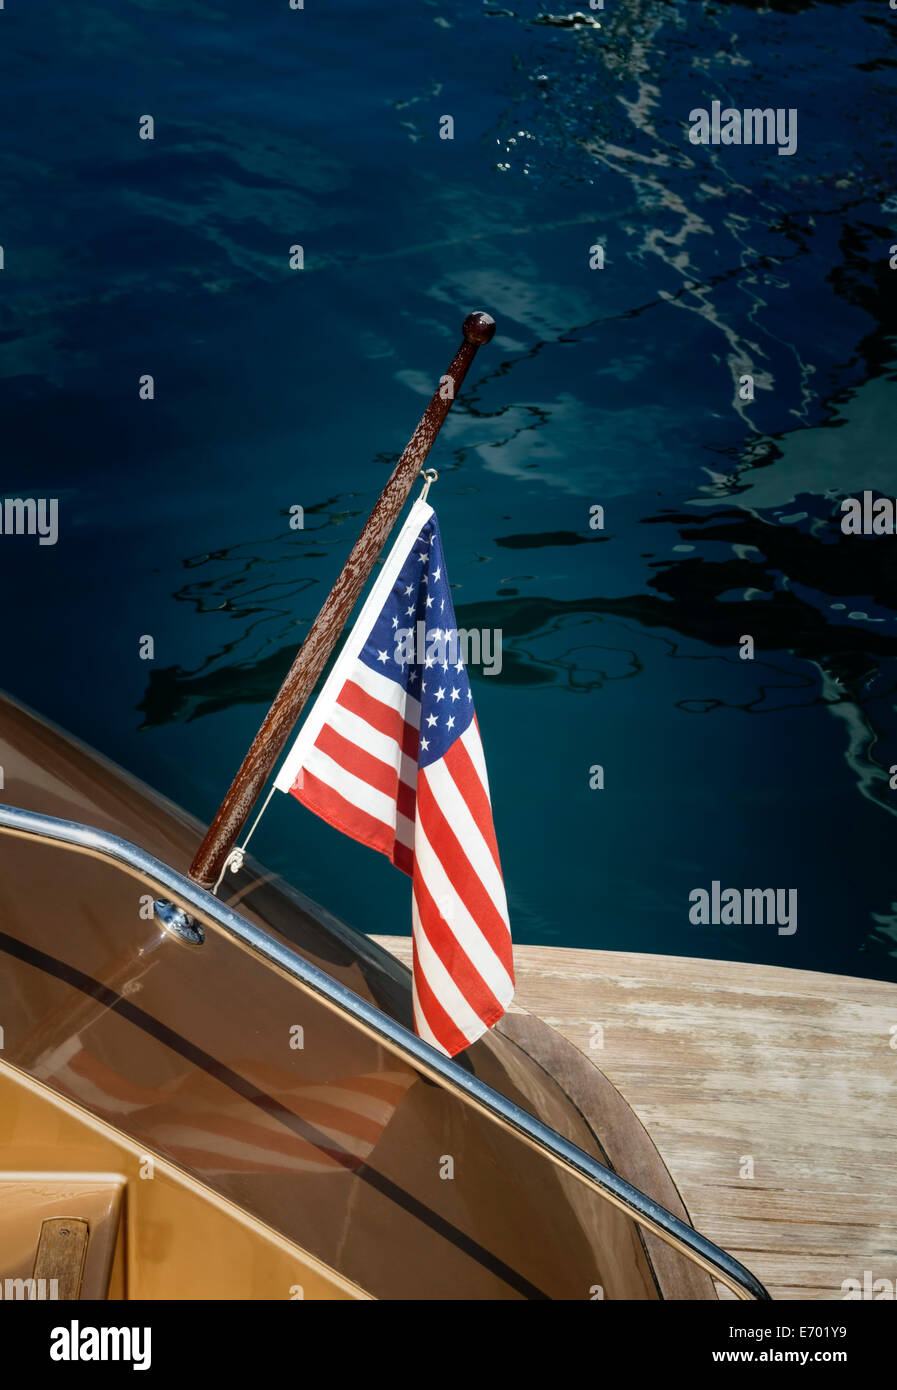 American flag on a boat in harbor. Stock Photo